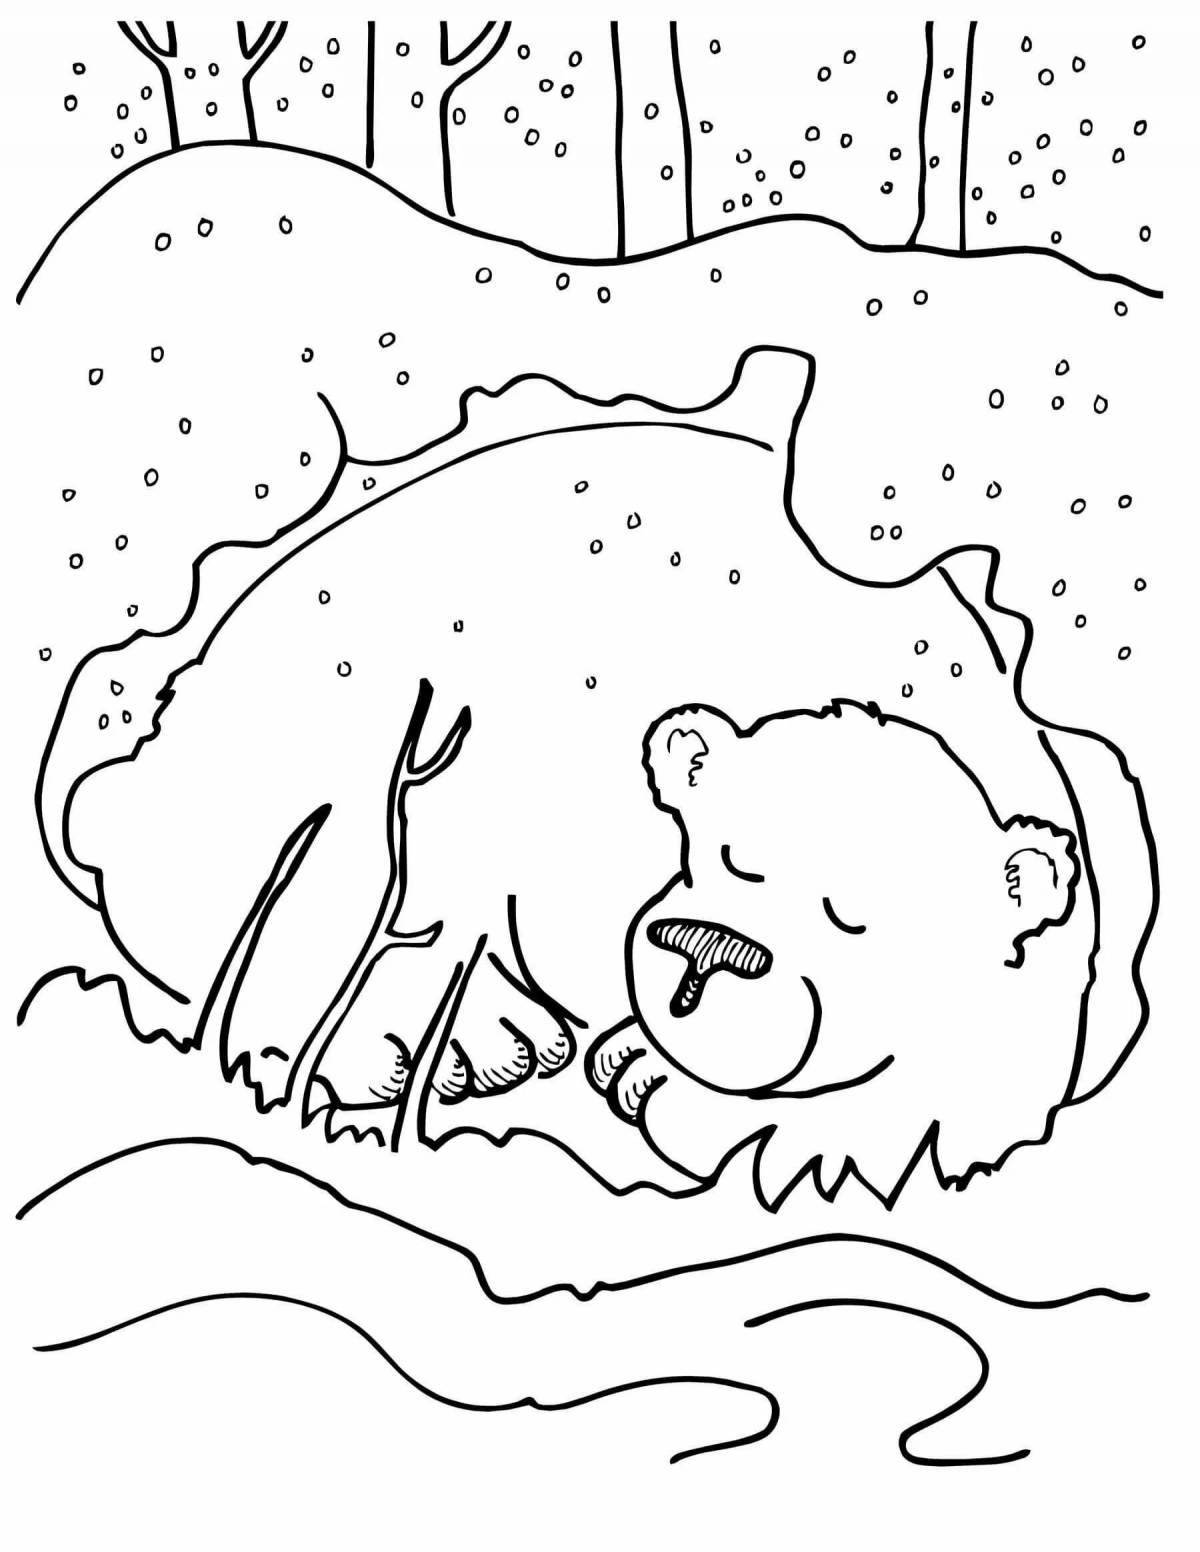 Coloring book smiling bear in the den